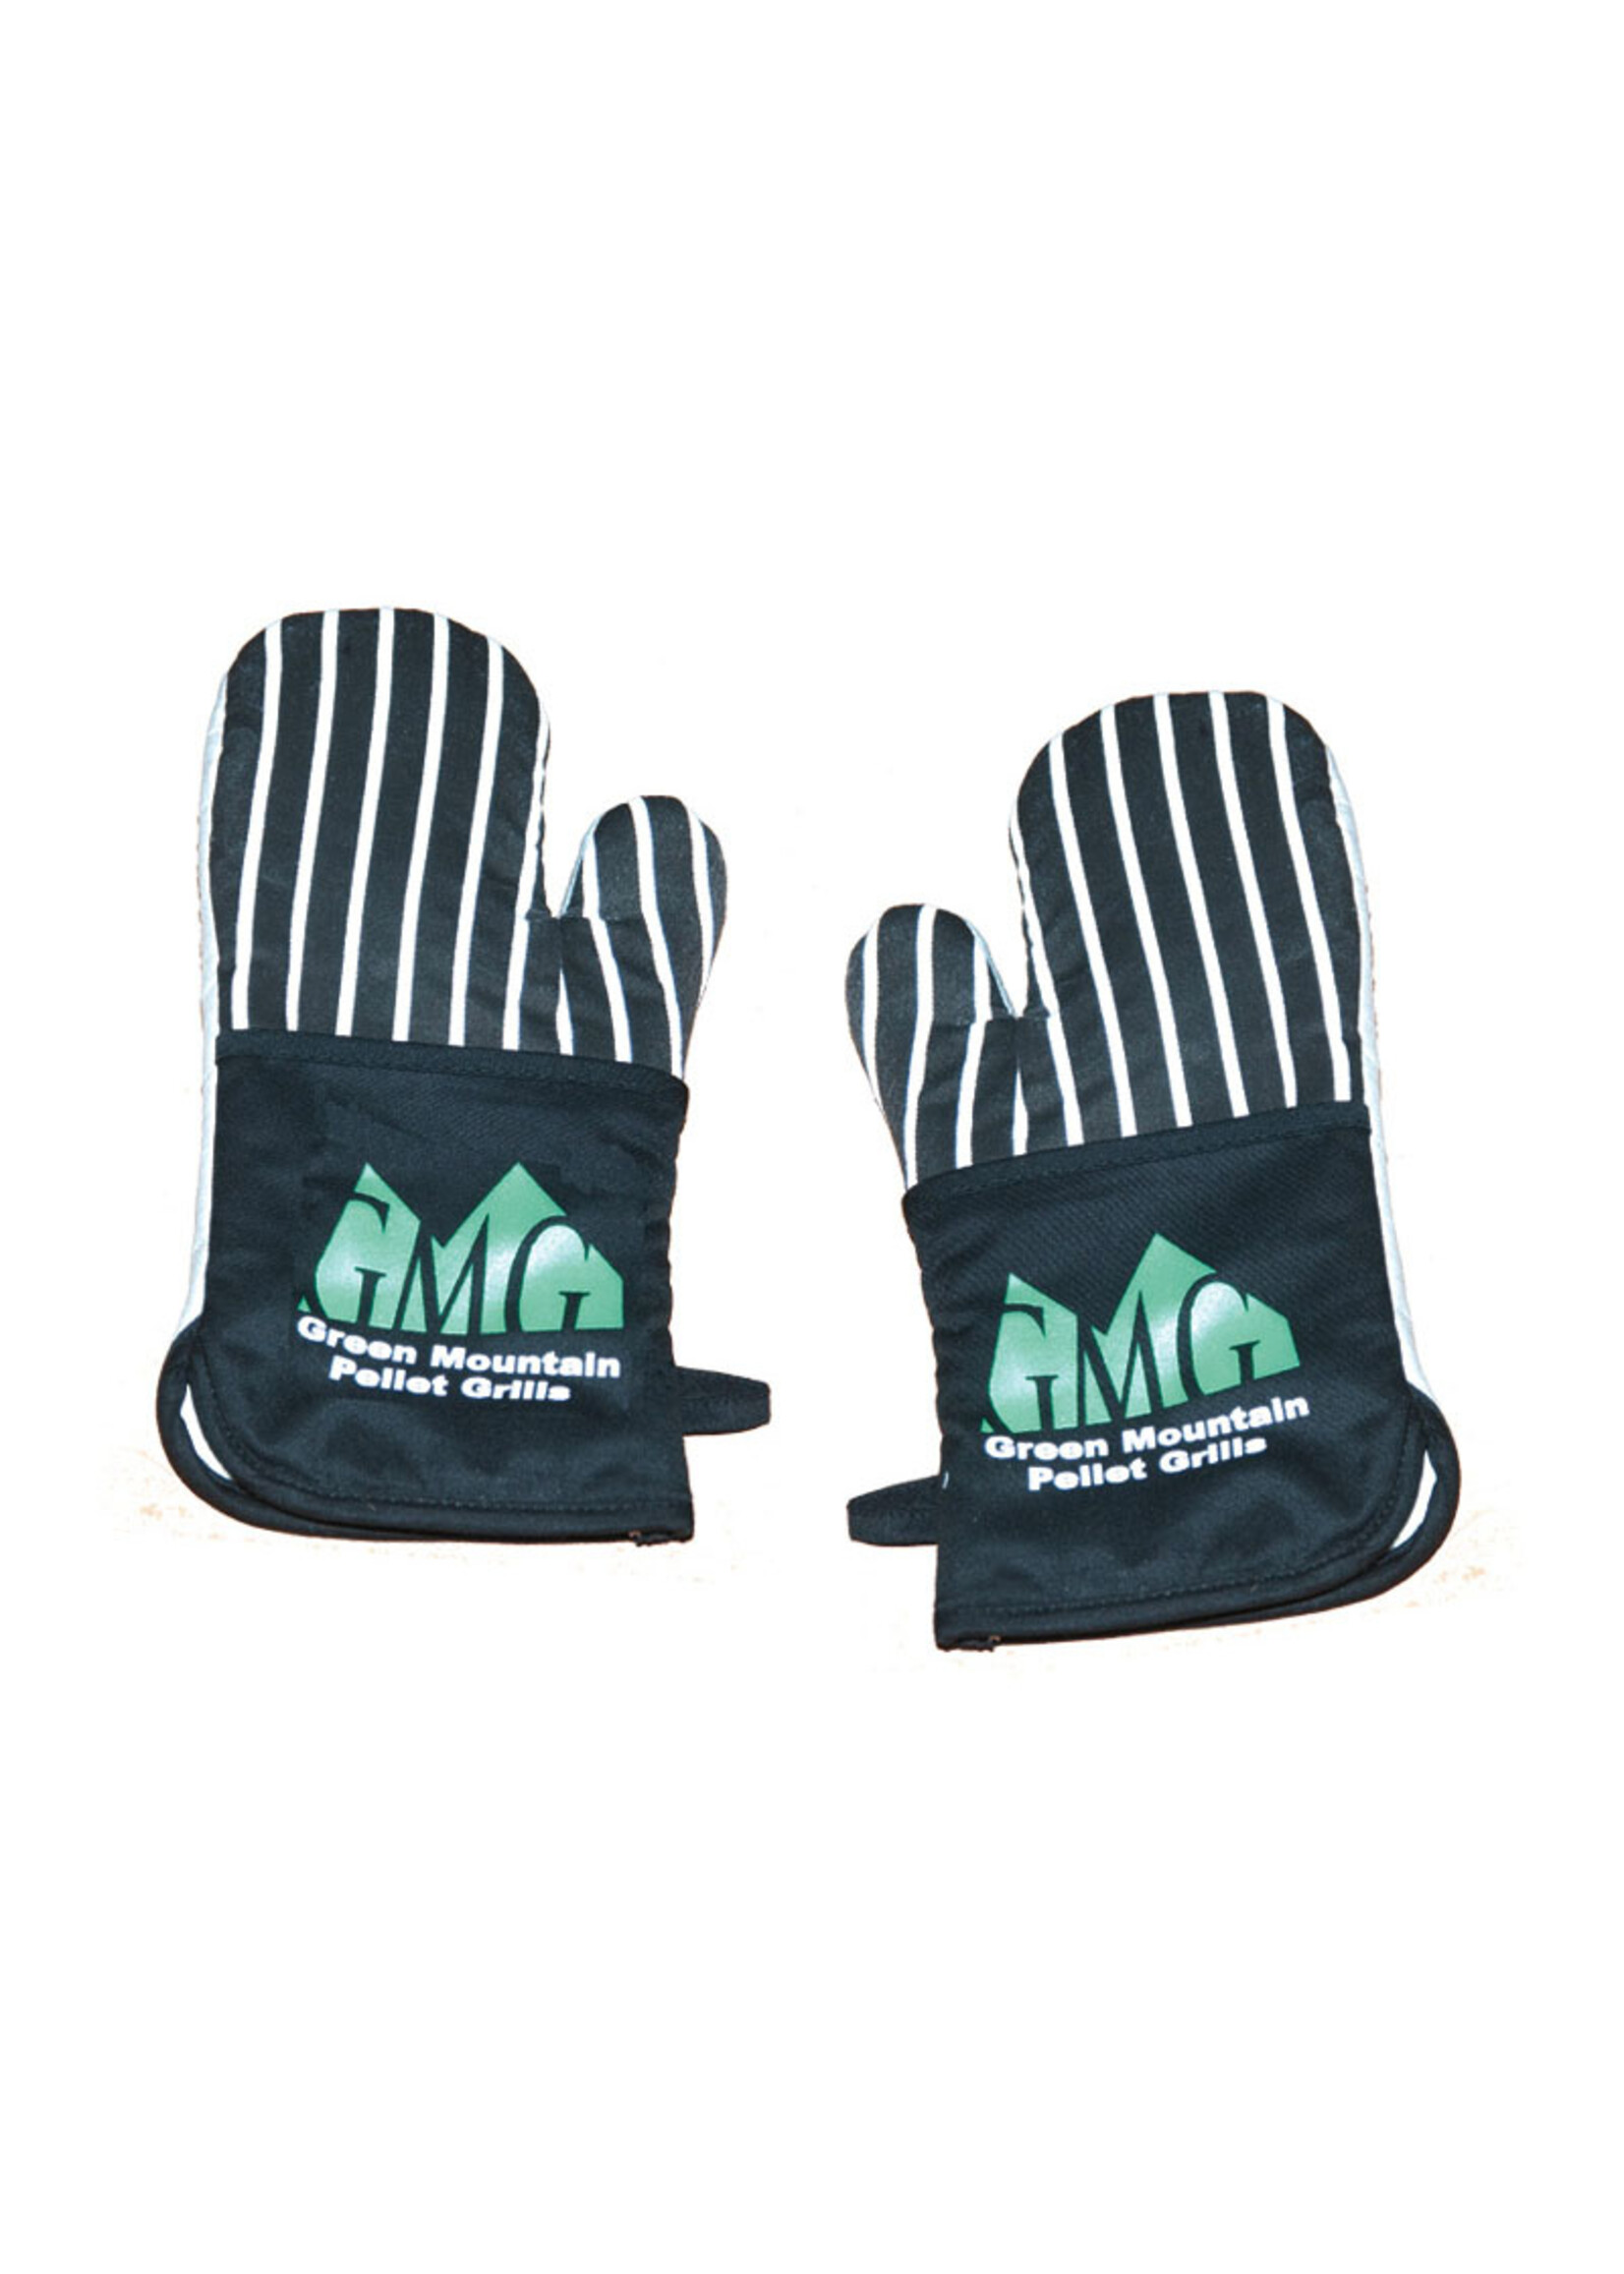 Green Mountain Grills GMG Oven Mitts